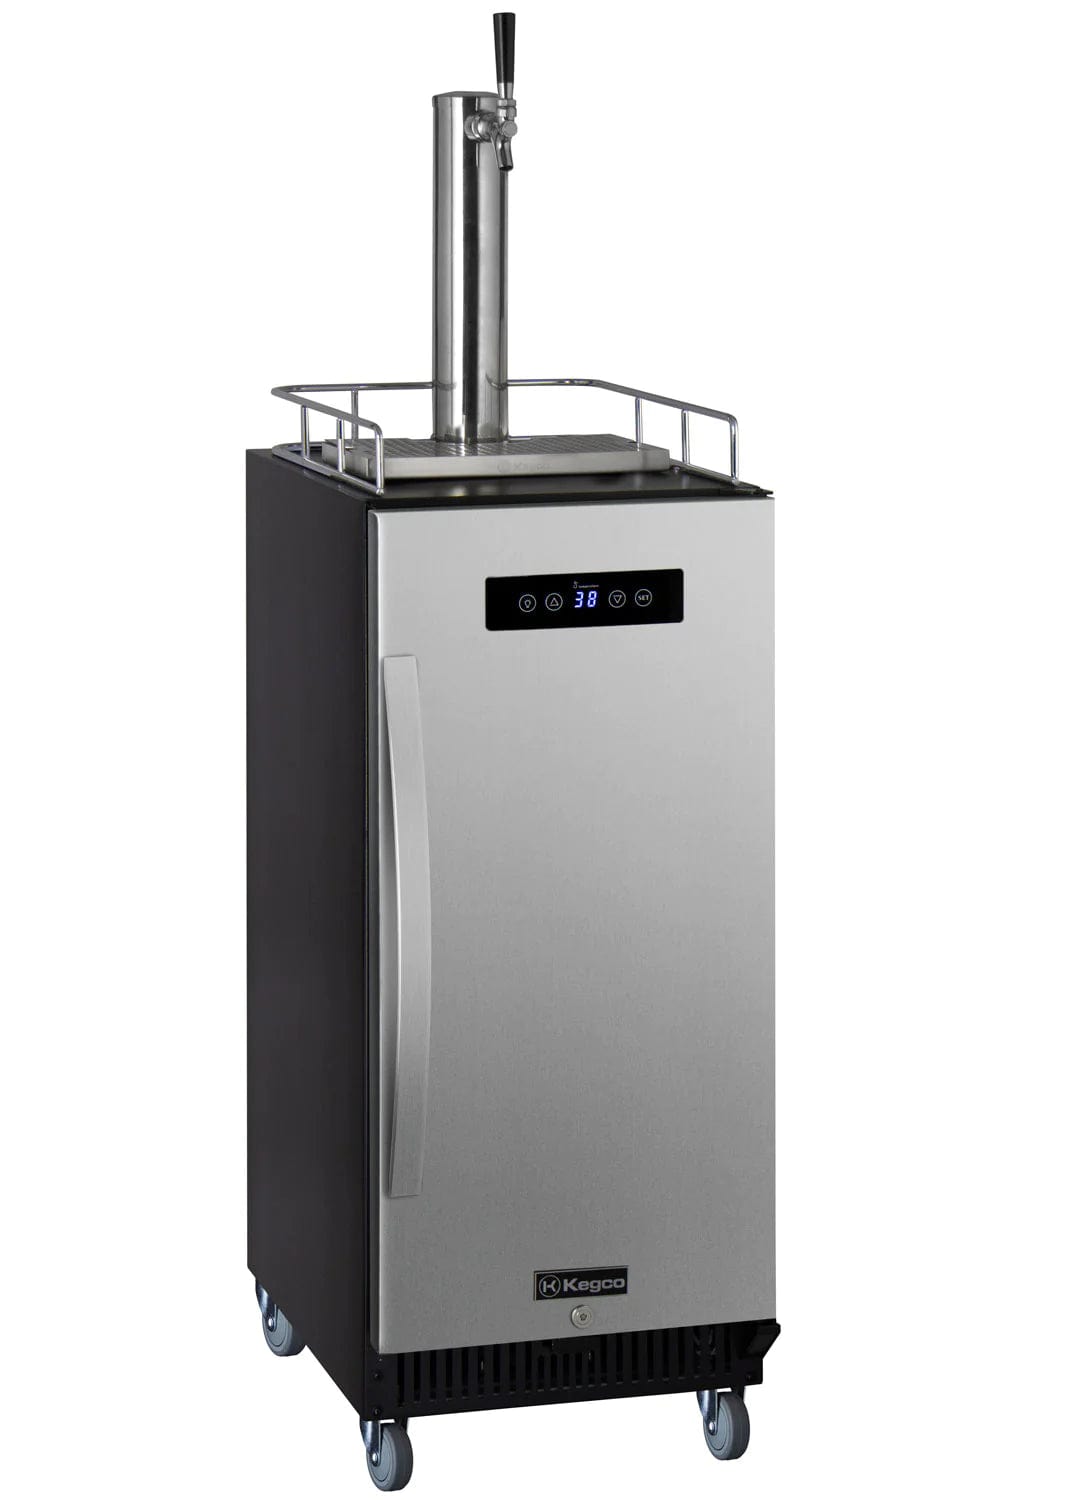 KEGCO Kegerator KEGCO 15 Wide Commercial Cold Brew Cofee Kegerator With Stainless Steel Door-ICS15BSRNK